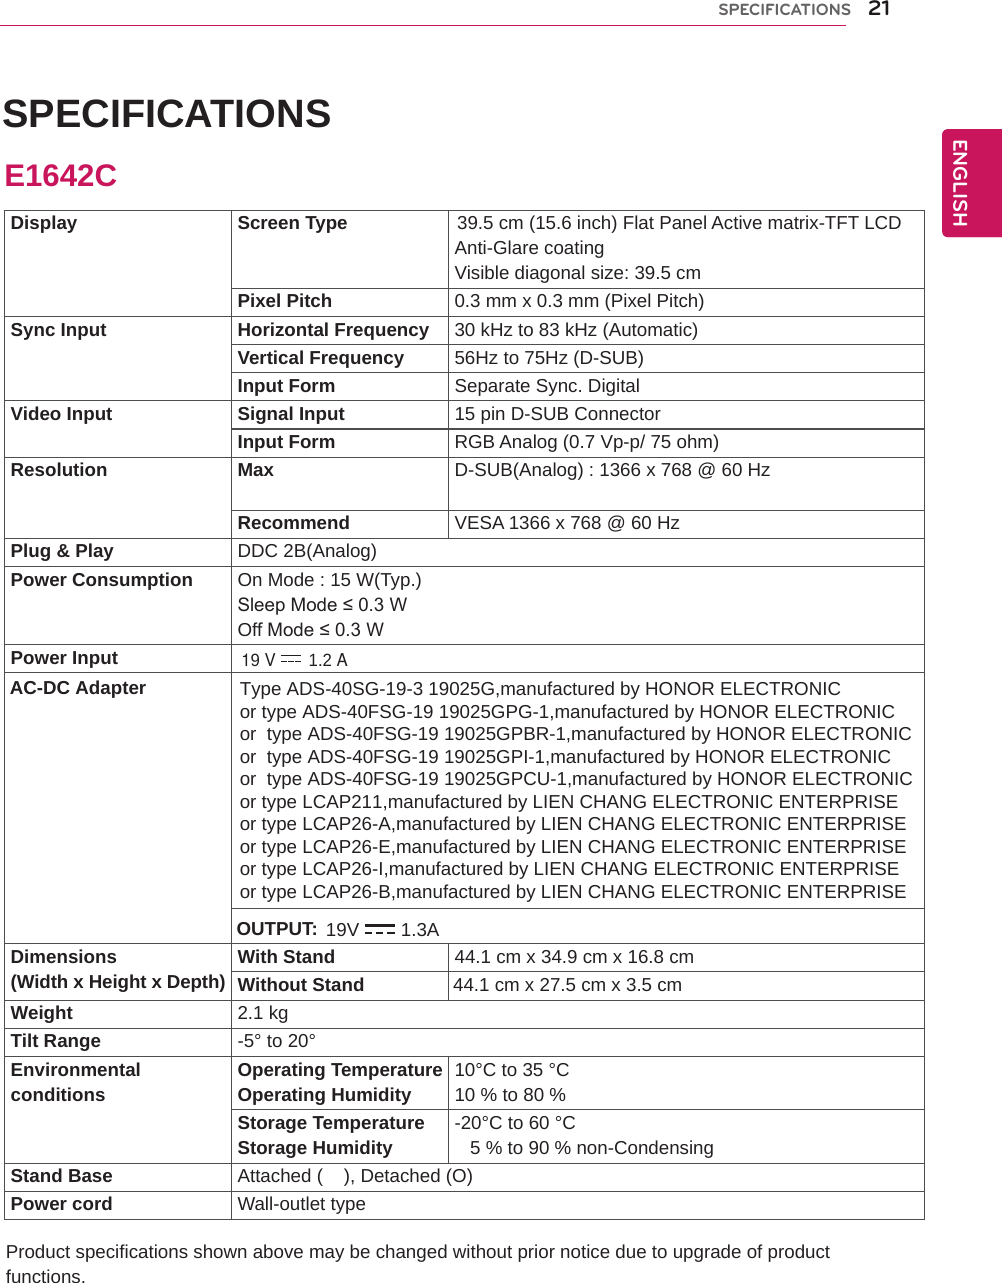 21ENGENGLISHSPECIFICATIONS SPECIFICATIONS Product specifications shown above may be changed without prior notice due to upgrade of product functions.Display Screen Type                     39.5 cm (15.6 inch) Flat Panel Active matrix-TFT LCDAnti-Glare coatingVisible diagonal size: 39.5 cmPixel Pitch 0.3 mm x 0.3 mm (Pixel Pitch)Sync Input Horizontal Frequency 30 kHz to 83 kHz (Automatic)Vertical Frequency 56Hz to 75Hz (D-SUB)Input Form Separate Sync.Video Input Signal Input 15 pin D-SUB Connector Input Form RGB Analog (0.7 Vp-p/ 75 ohm)Resolution Max D-SUB(Analog) : 1366 x 768 @ 60 HzRecommend VESA 1366 x 768 @ 60 HzPlug &amp; Play DDC 2B(Analog)Power Consumption On Mode : 15 W(Typ.)Sleep Mode ≤ 0.3 W Off Mode ≤ 0.3 W Power InputDimensions(Width x Height x Depth) With Stand 44.1 cm x 34.9 cm x 16.8 cmWithout Stand                 44.1 cm x 27.5 cm x 3.5 cmWeight 2.1 kgTilt Range -5° to 20°Environmentalconditions Operating TemperatureOperating Humidity 10°C to 35 °C10 % to 80 % Storage TemperatureStorage Humidity -20°C to 60 °C   5 % to 90 % non-CondensingStand Base Attached (    ), Detached (O)Power cord Wall-outlet typeE1642C19 V 1.2 A  DigitalAC-DC Adapter Type ADS-40SG-19-3 19025G,manufactured by HONOR ELECTRONICor type ADS-40FSG-19 19025GPG-1,manufactured by HONOR ELECTRONICor  type ADS-40FSG-19 19025GPBR-1,manufactured by HONOR ELECTRONICor  type ADS-40FSG-19 19025GPI-1,manufactured by HONOR ELECTRONICor  type ADS-40FSG-19 19025GPCU-1,manufactured by HONOR ELECTRONICor type LCAP211,manufactured by LIEN CHANG ELECTRONIC ENTERPRISEor type LCAP26-A,manufactured by LIEN CHANG ELECTRONIC ENTERPRISEor type LCAP26-E,manufactured by LIEN CHANG ELECTRONIC ENTERPRISEor type LCAP26-I,manufactured by LIEN CHANG ELECTRONIC ENTERPRISEor type LCAP26-B,manufactured by LIEN CHANG ELECTRONIC ENTERPRISE OUTPUT: 19V 1.3A